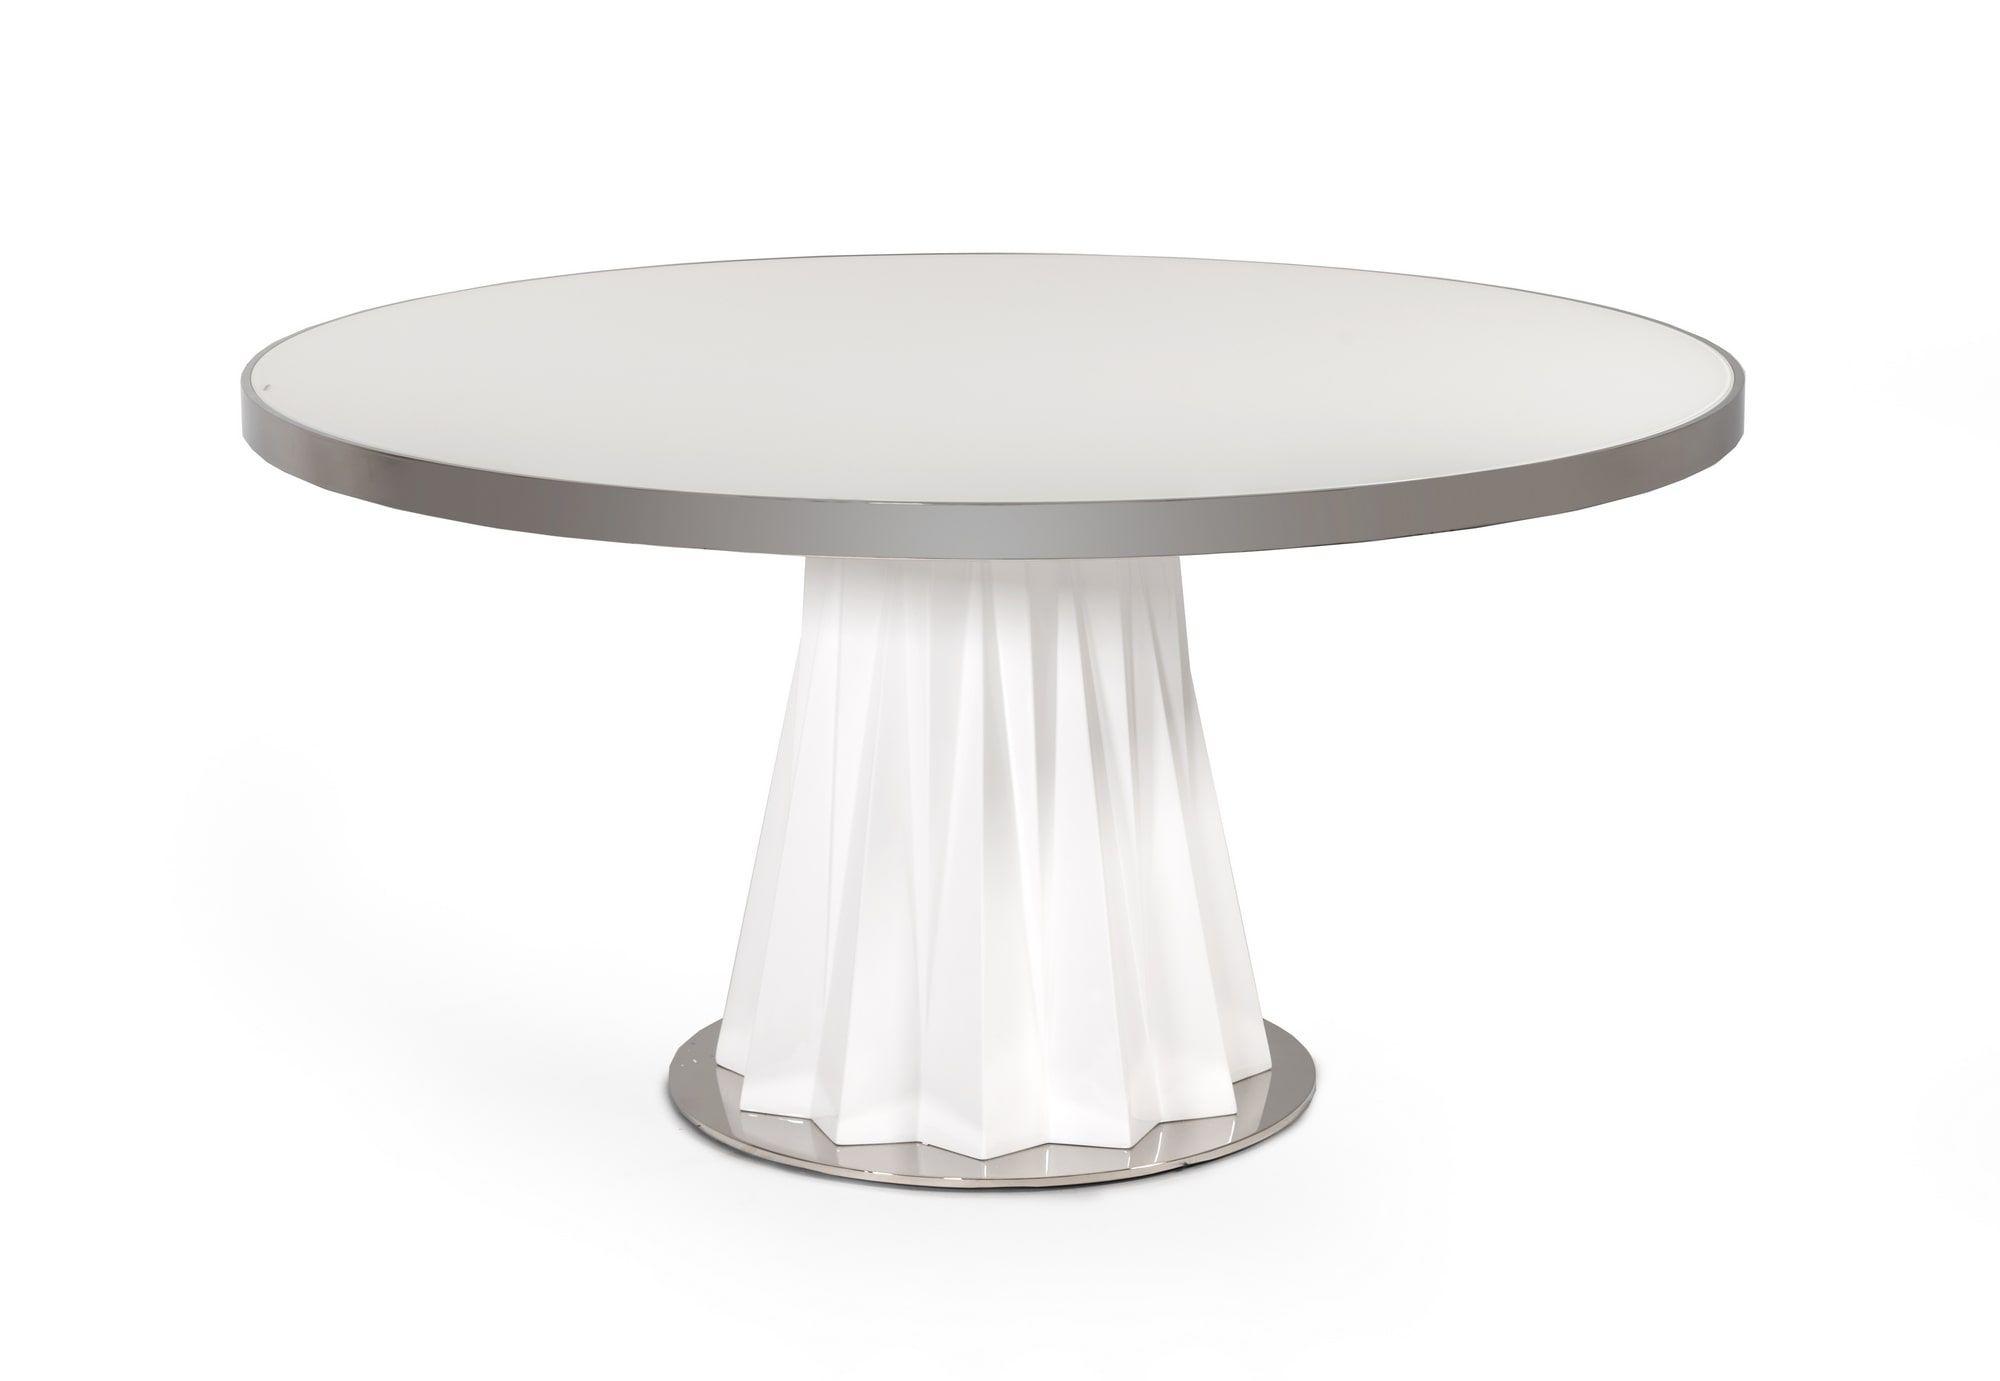 Contemporary, Modern Dining Table Cabaret VGVCT1799 in White 